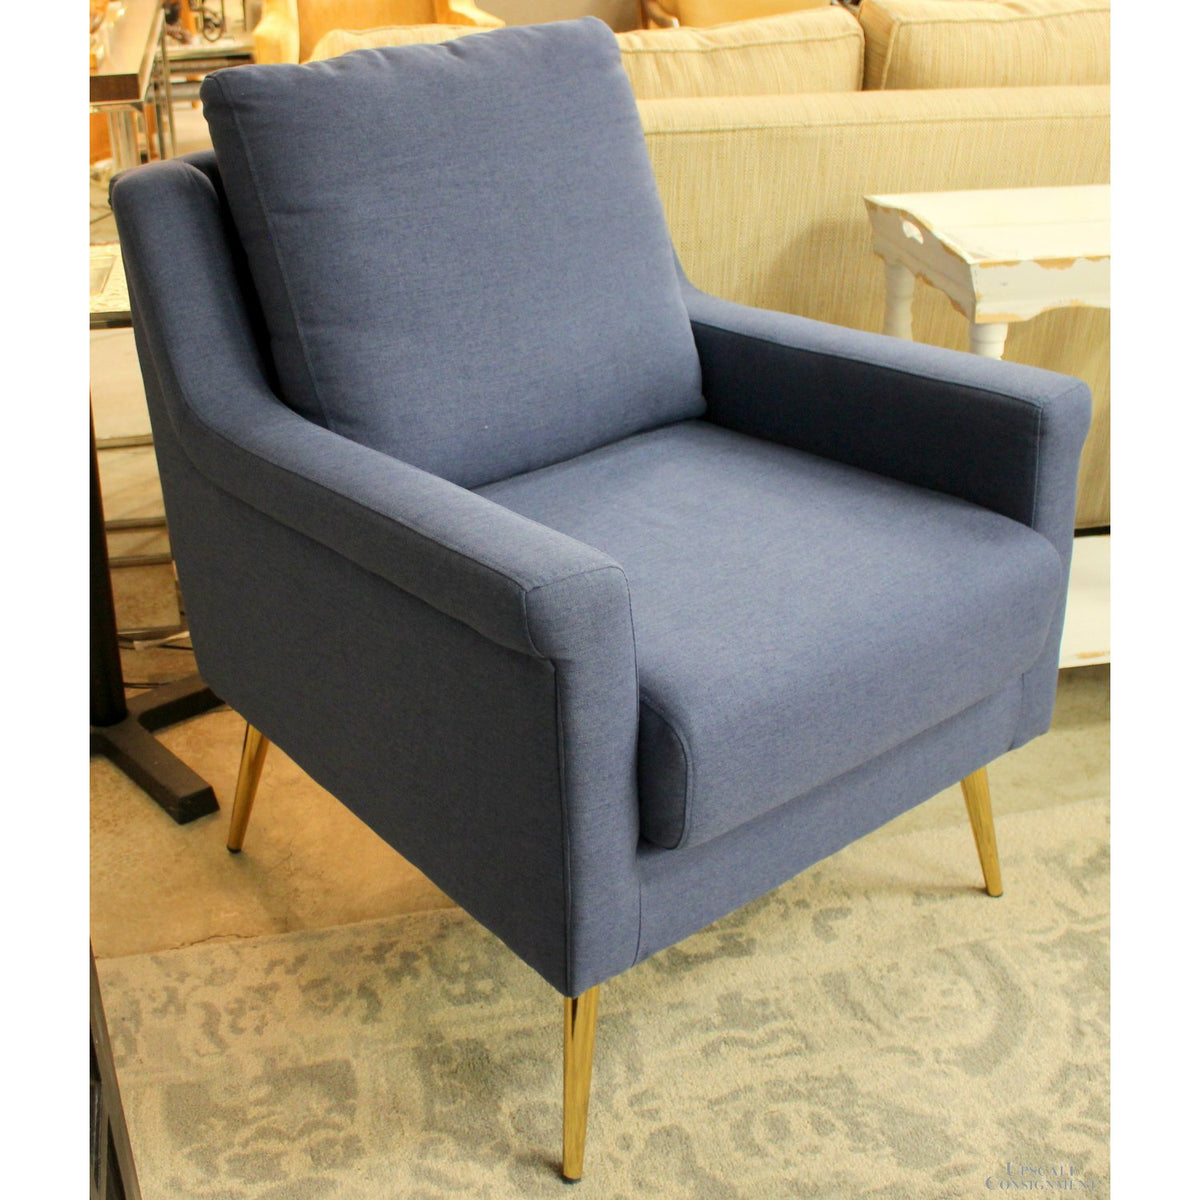 Mor Furniture 'Copley' Accent Chair